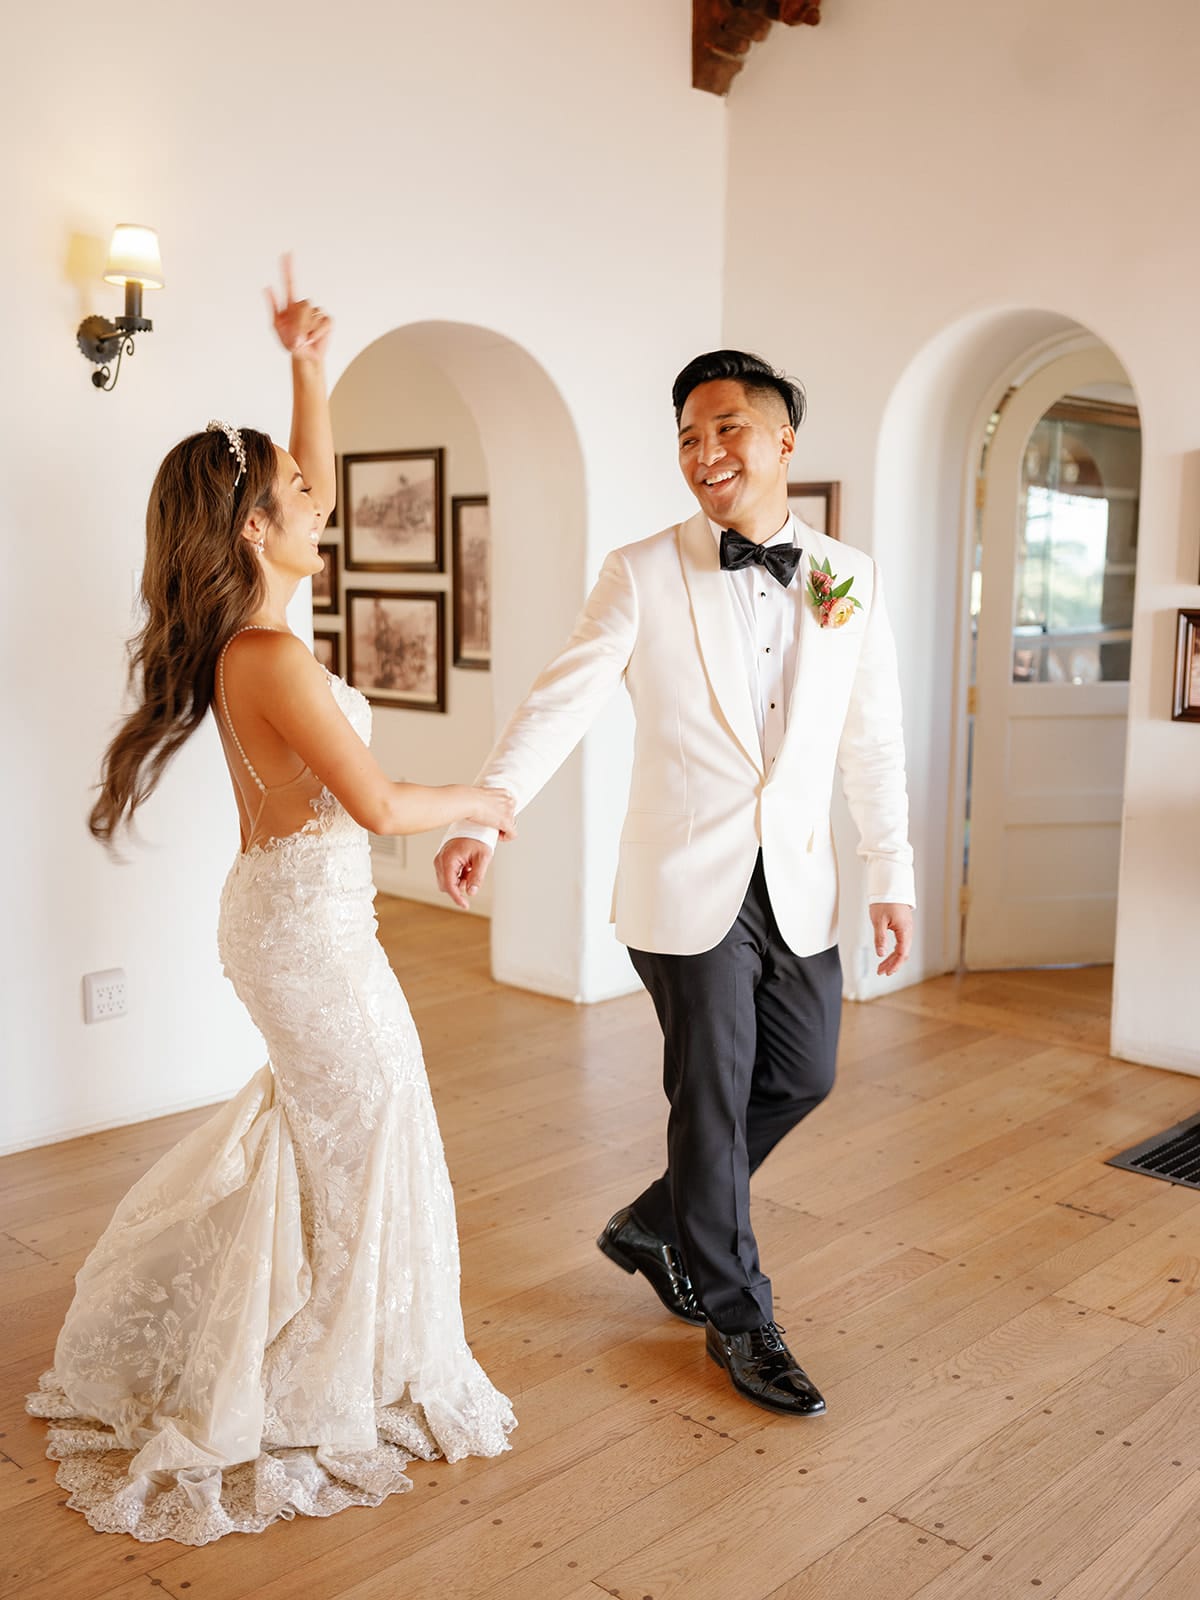 The bride and groom practice their first dance at Casa Romantica